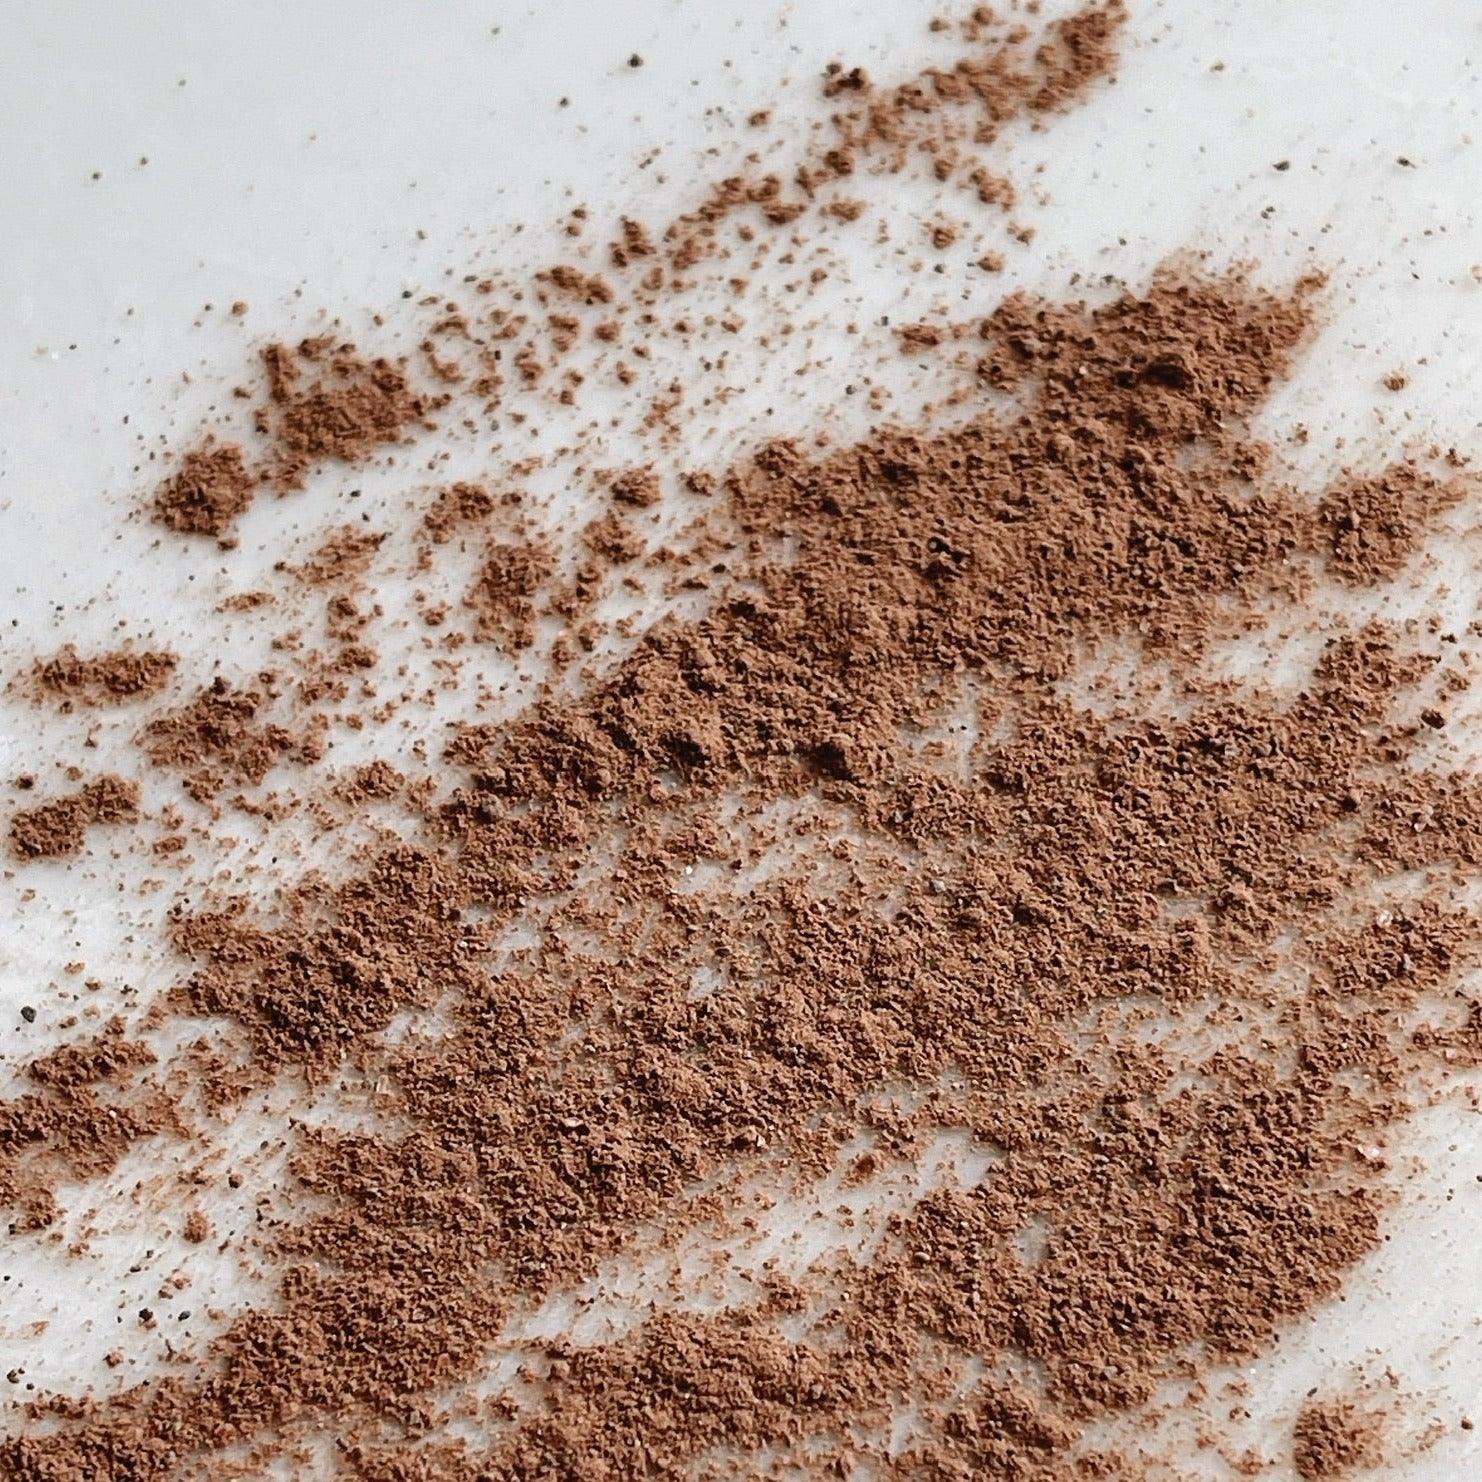 STARDUST CLAY CLEANSER